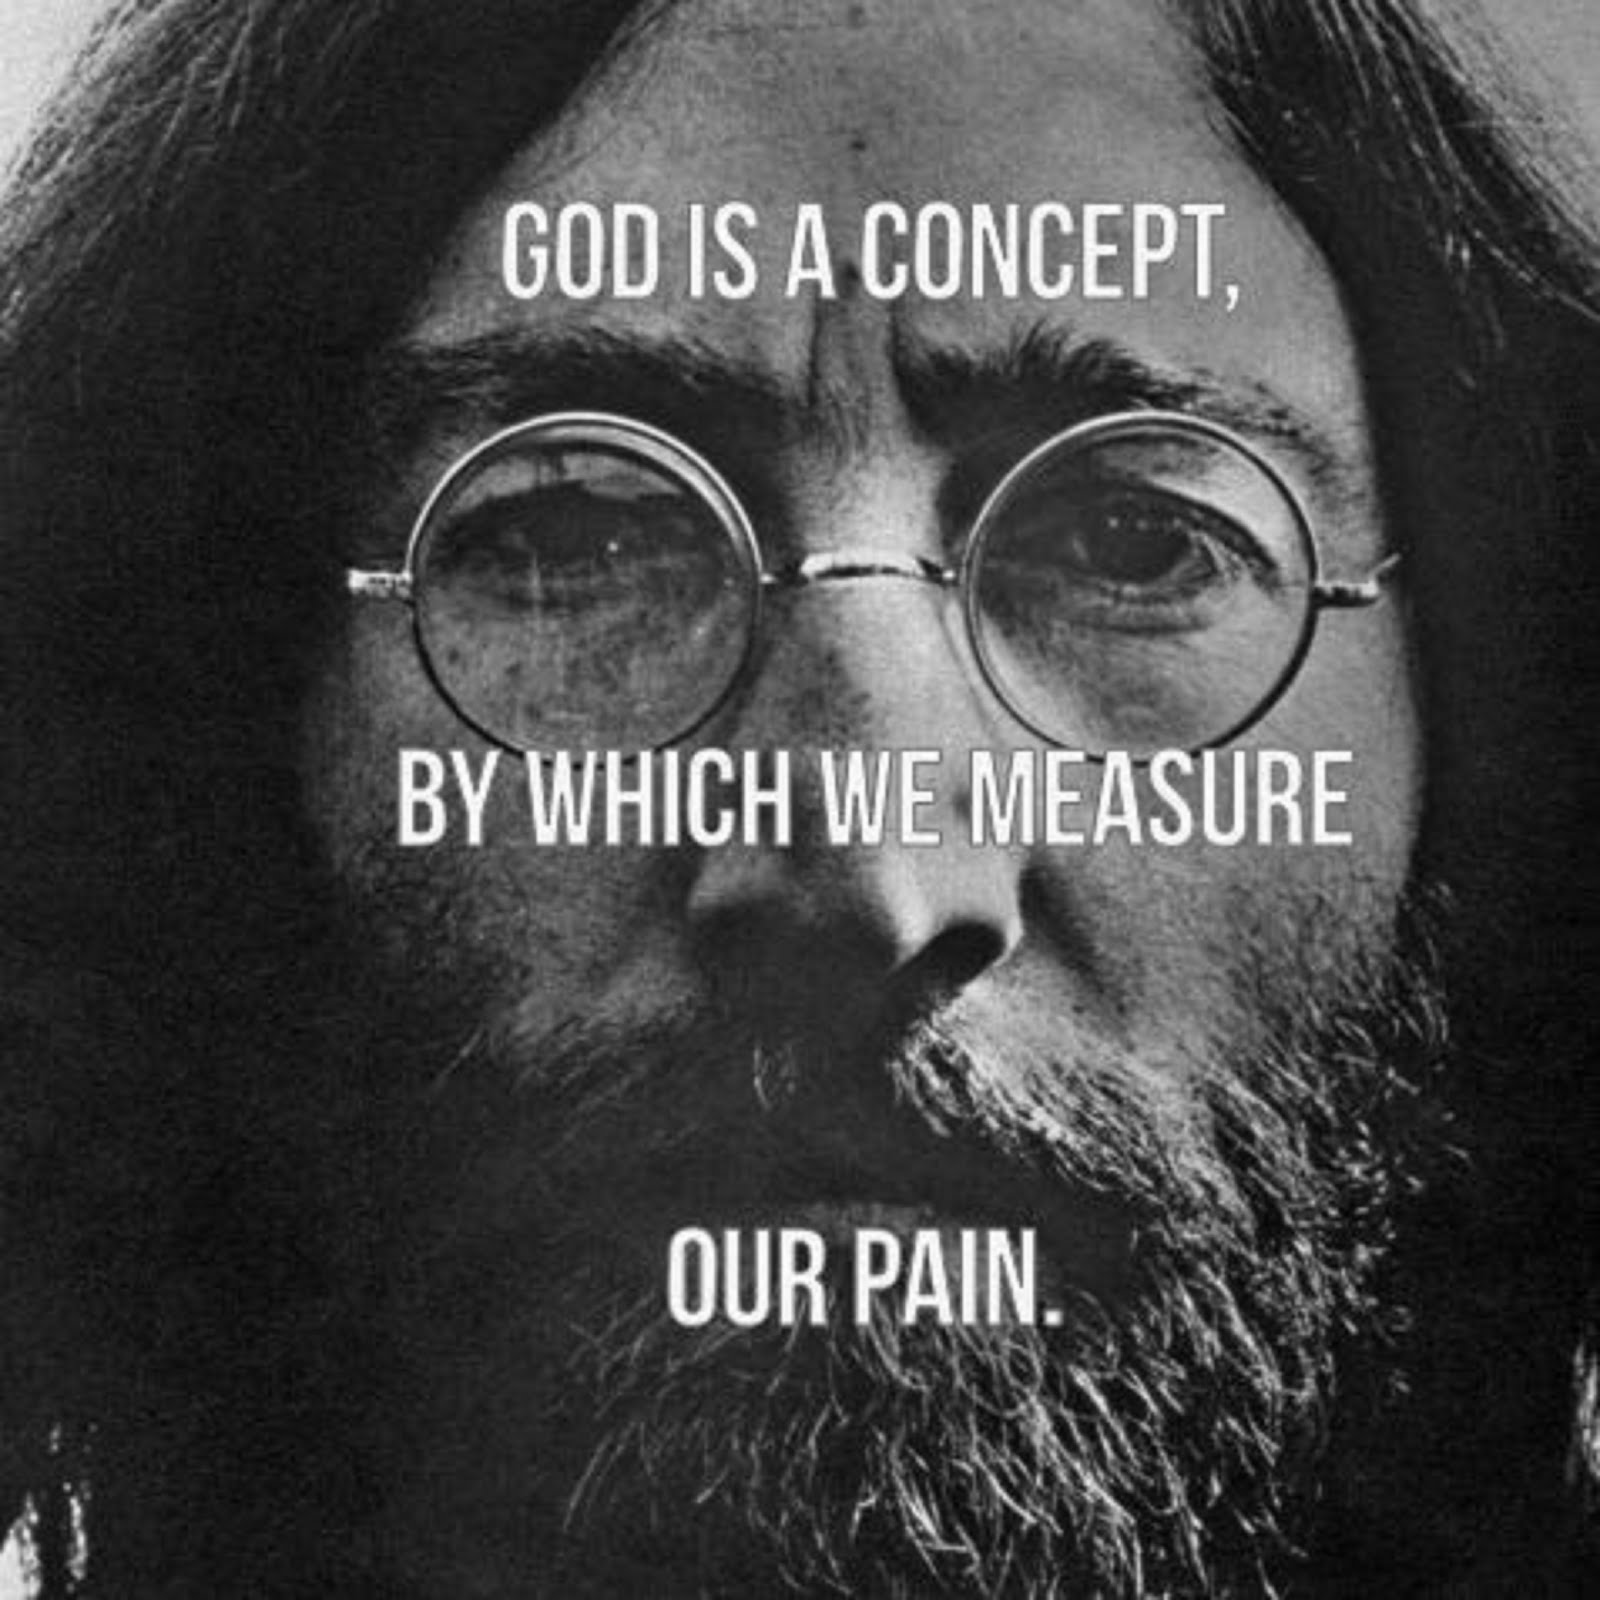 JOHN LENNON - "GOD IS A CONCEPT BY WHICH WE MEASURE OUR PAIN"